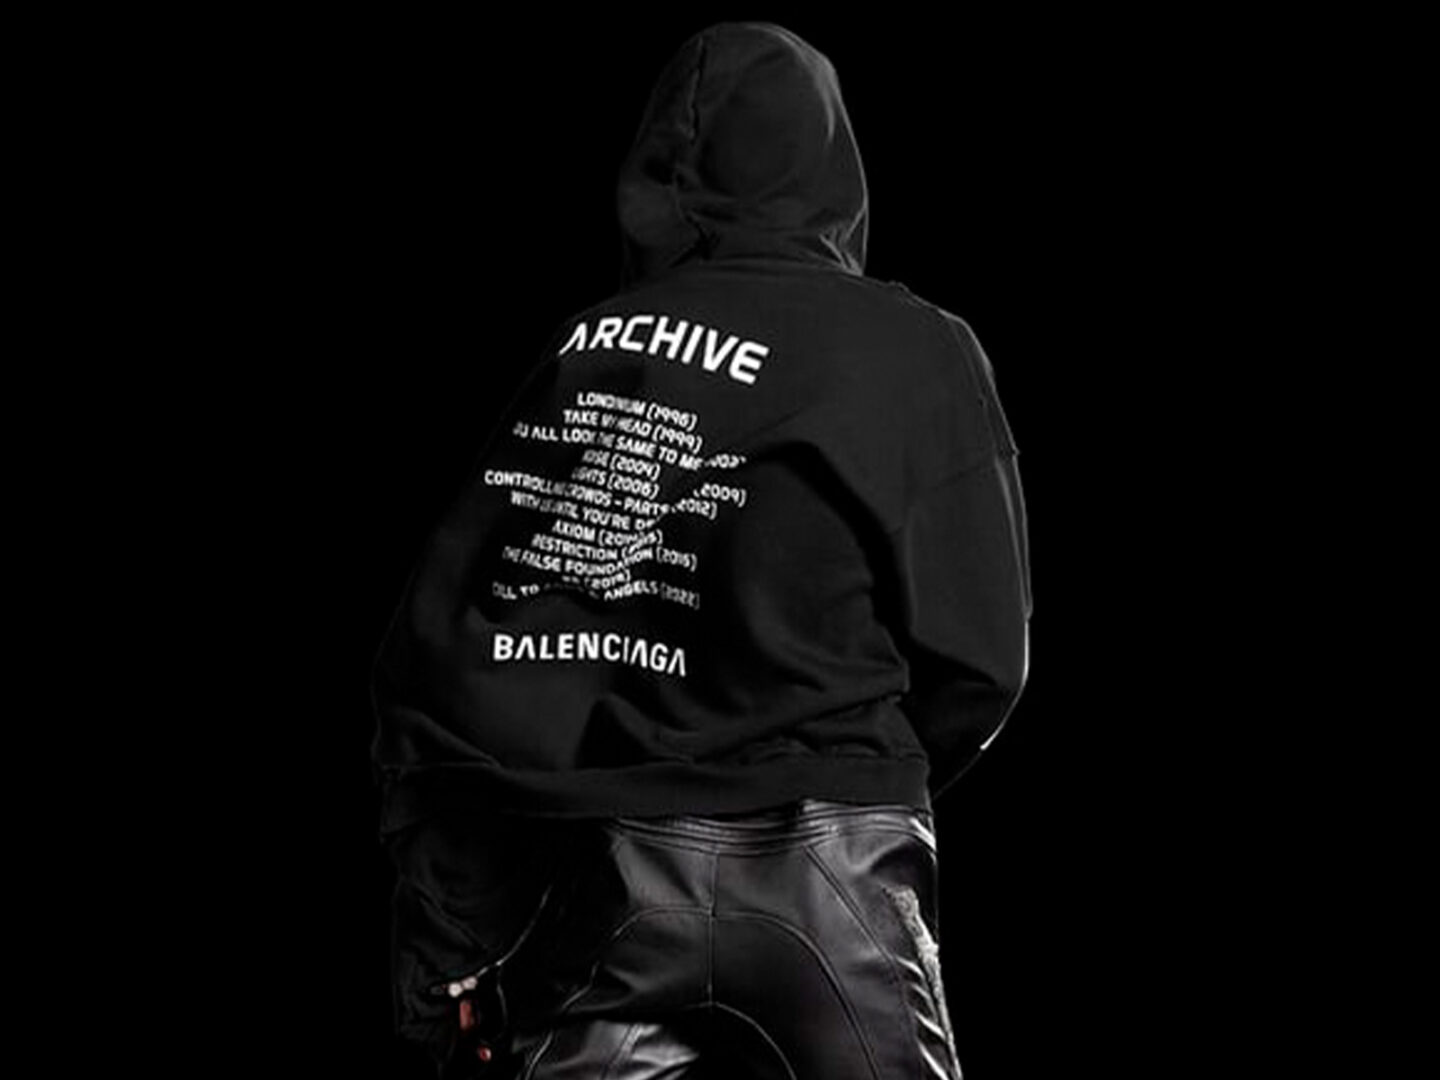 Balenciaga launches interactive clothing collection in collaboration with Archive group